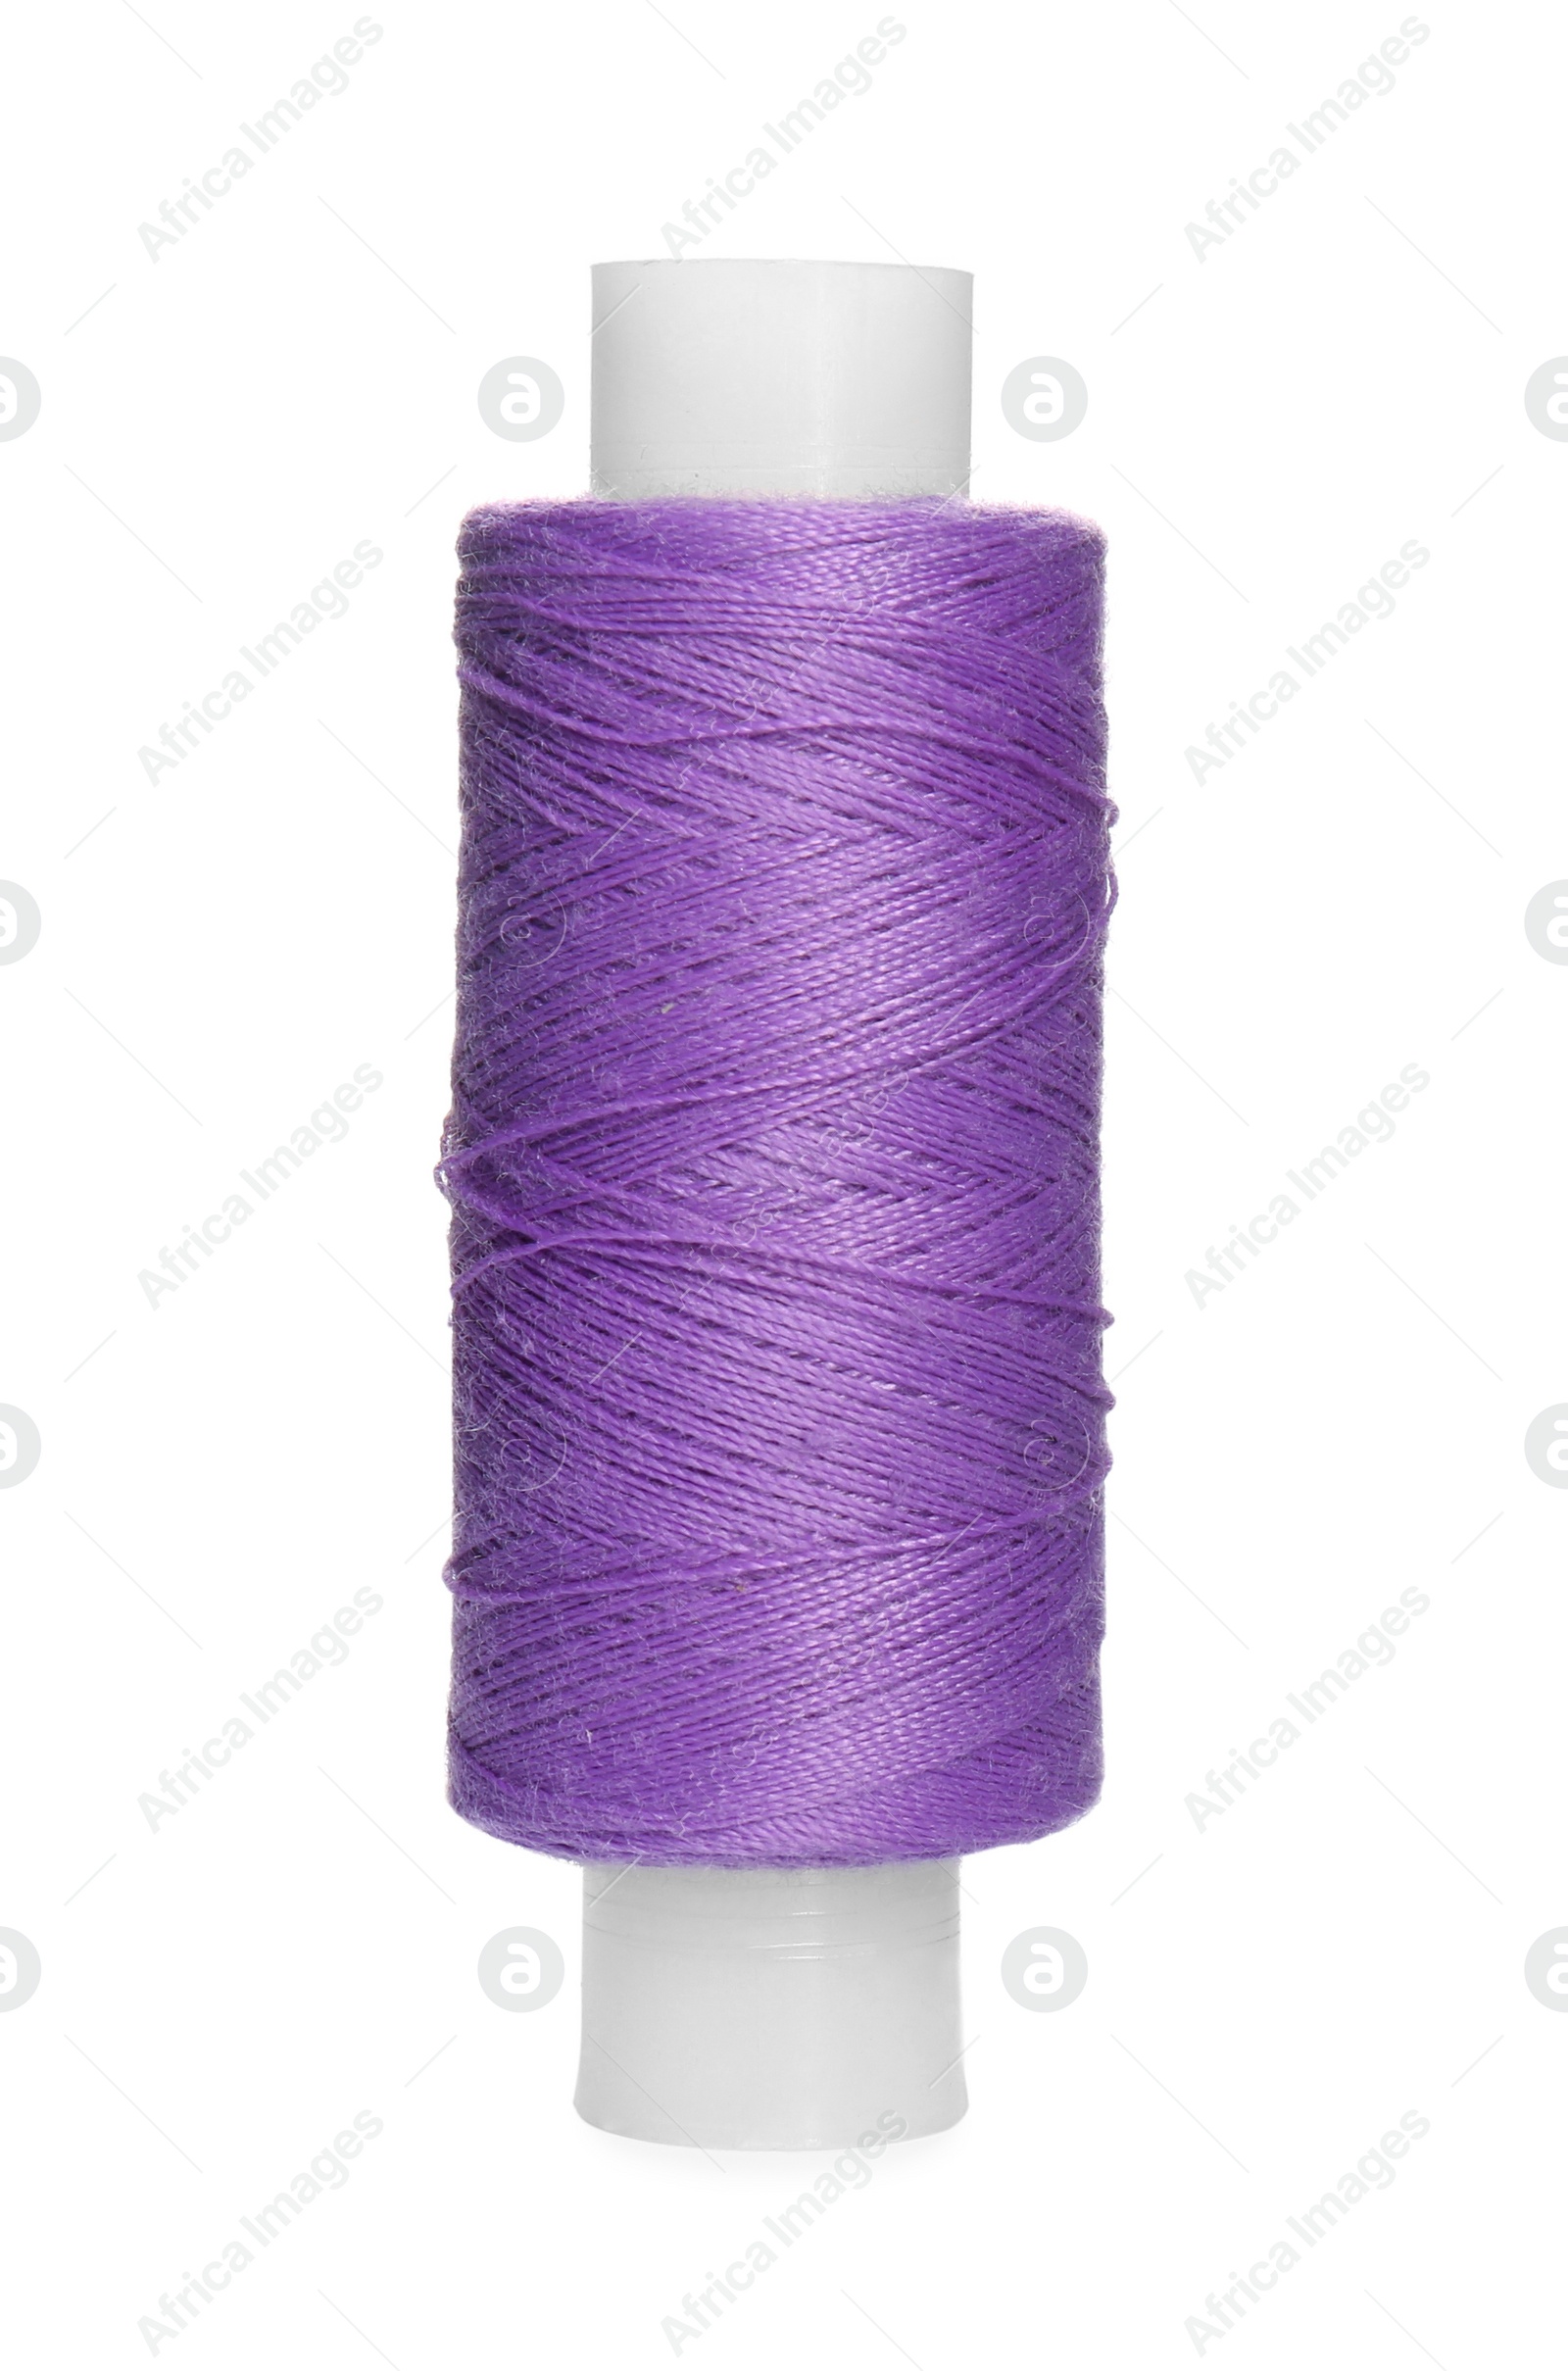 Photo of Spool of violet sewing thread isolated on white